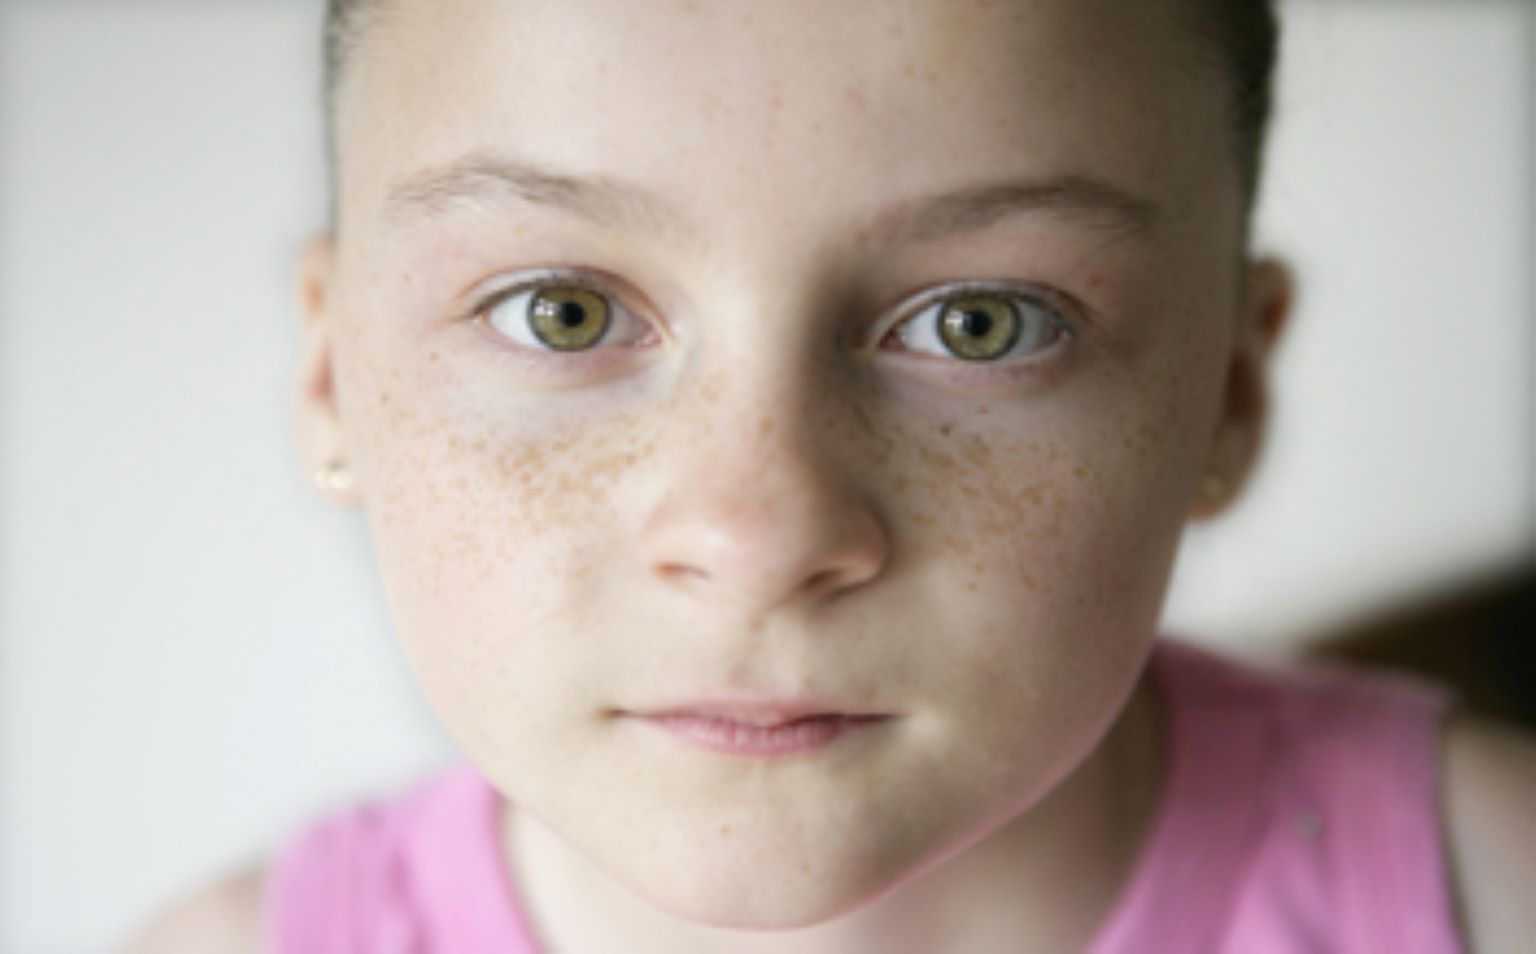 A young girl stares back at the camera. Her hair is pulled back away from her face. She has freckles and green eyes.